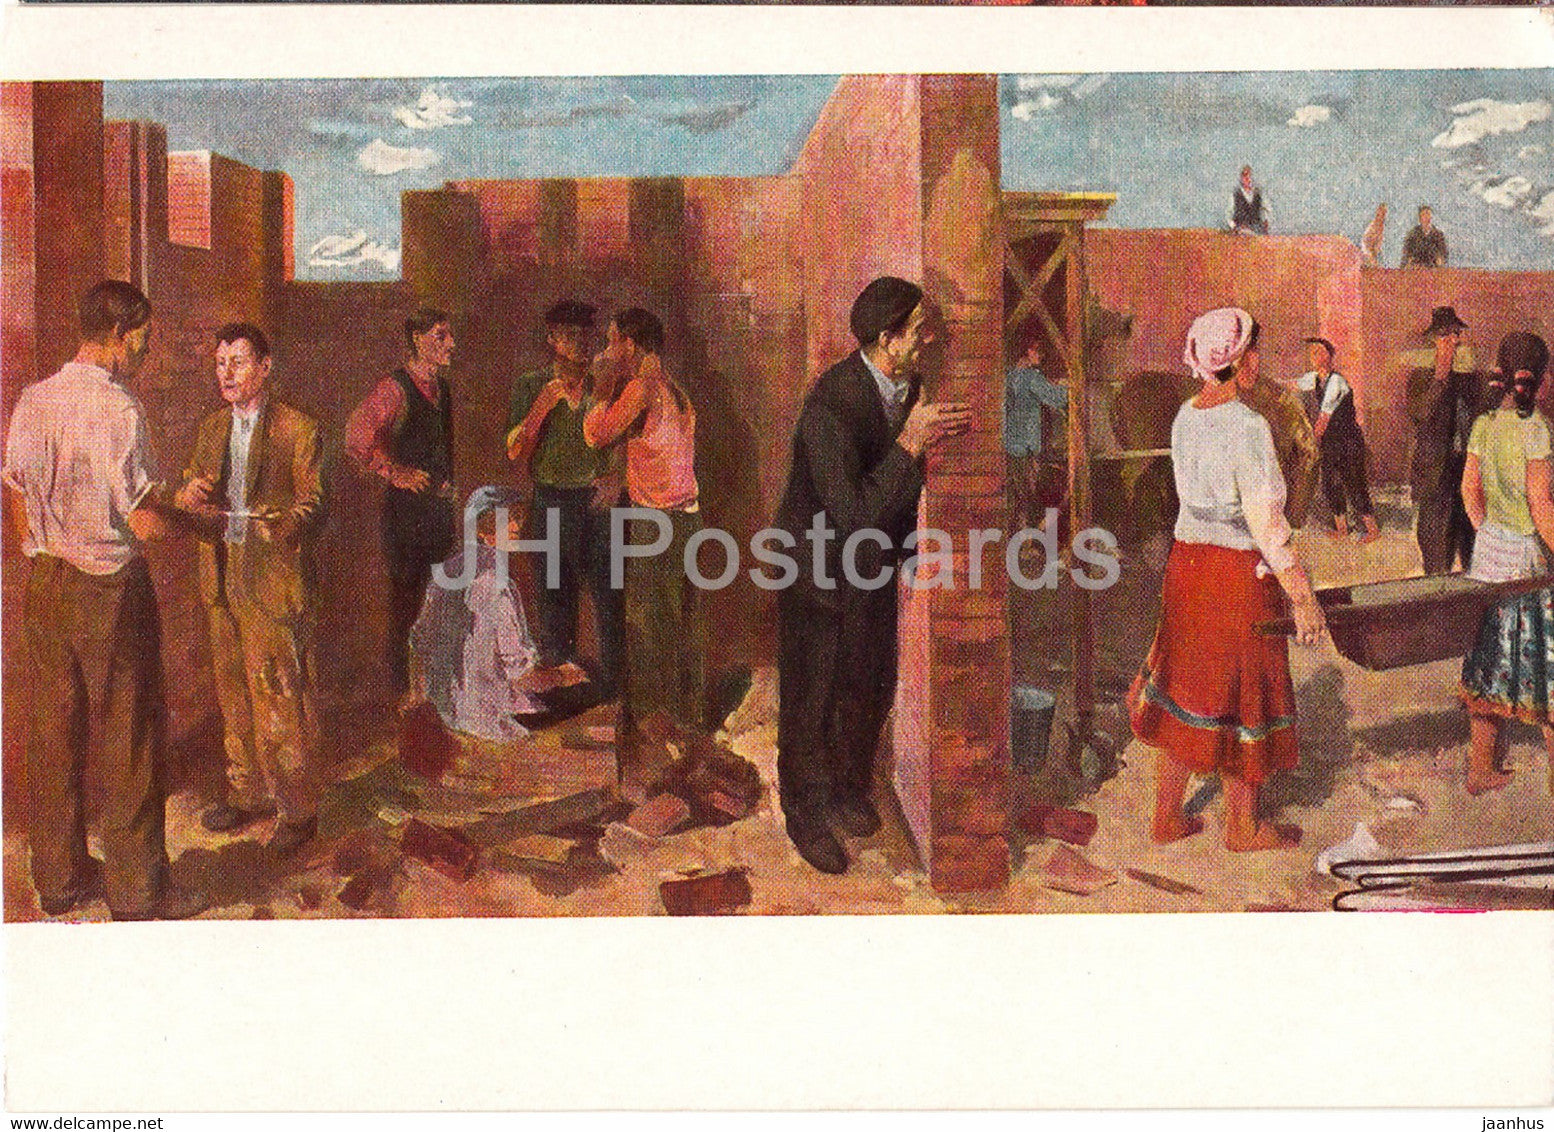 painting by A. Bernath - The Beginning of the Labor Movement in the Construction Industry - 1 - hungarian art - unused - JH Postcards